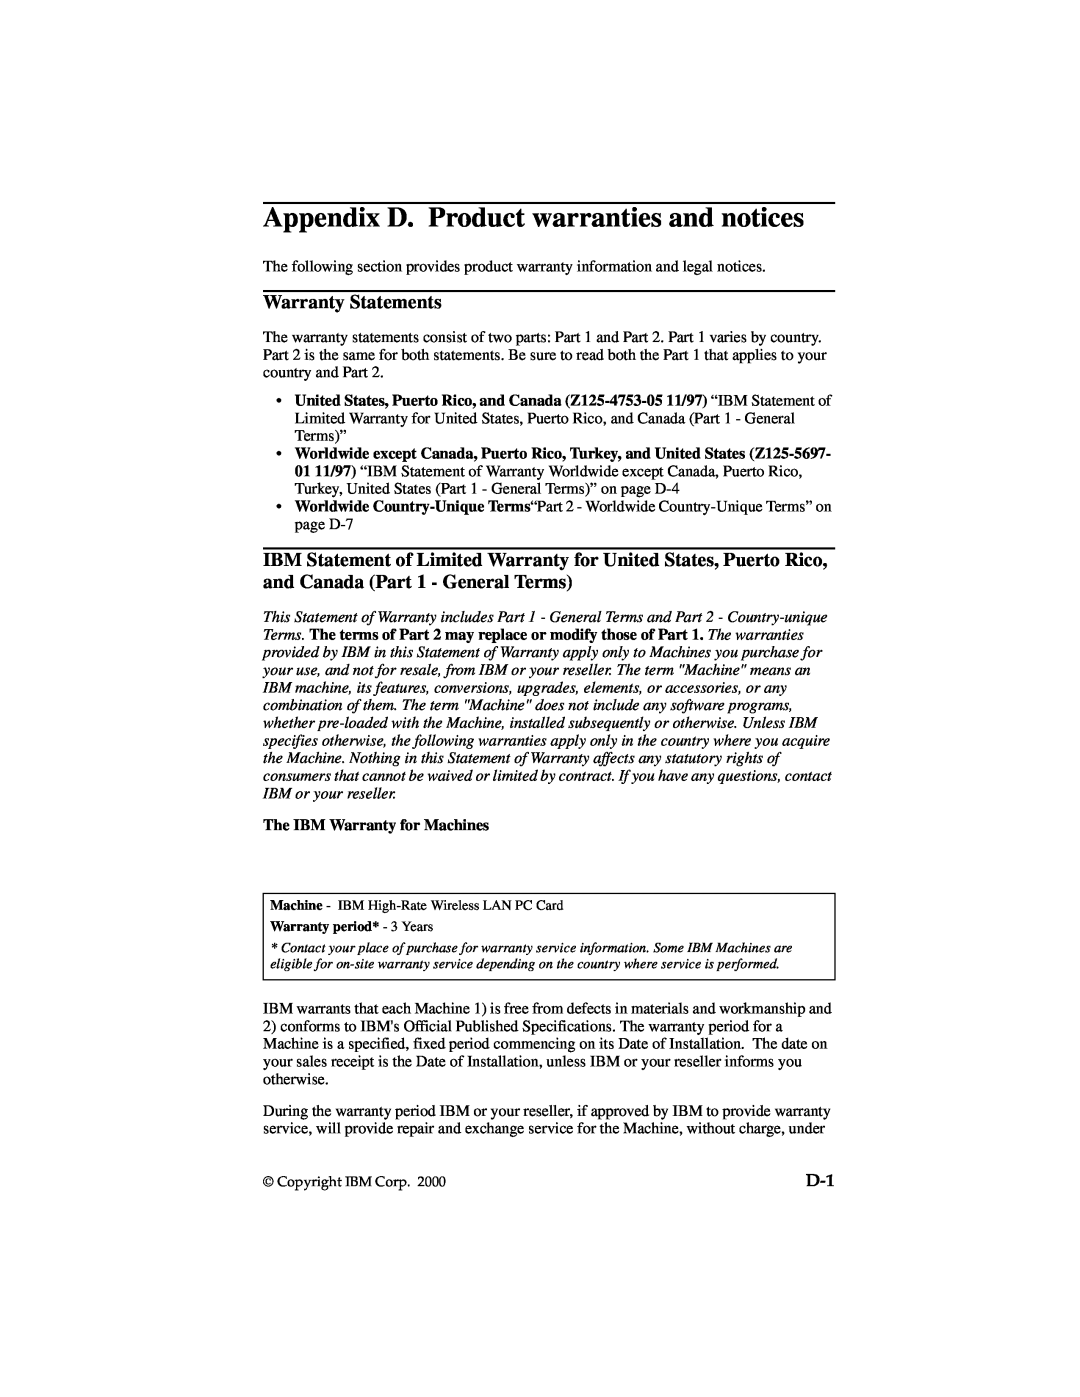 IBM 19K4543 manual Appendix D. Product warranties and notices, Warranty Statements, The IBM Warranty for Machines 